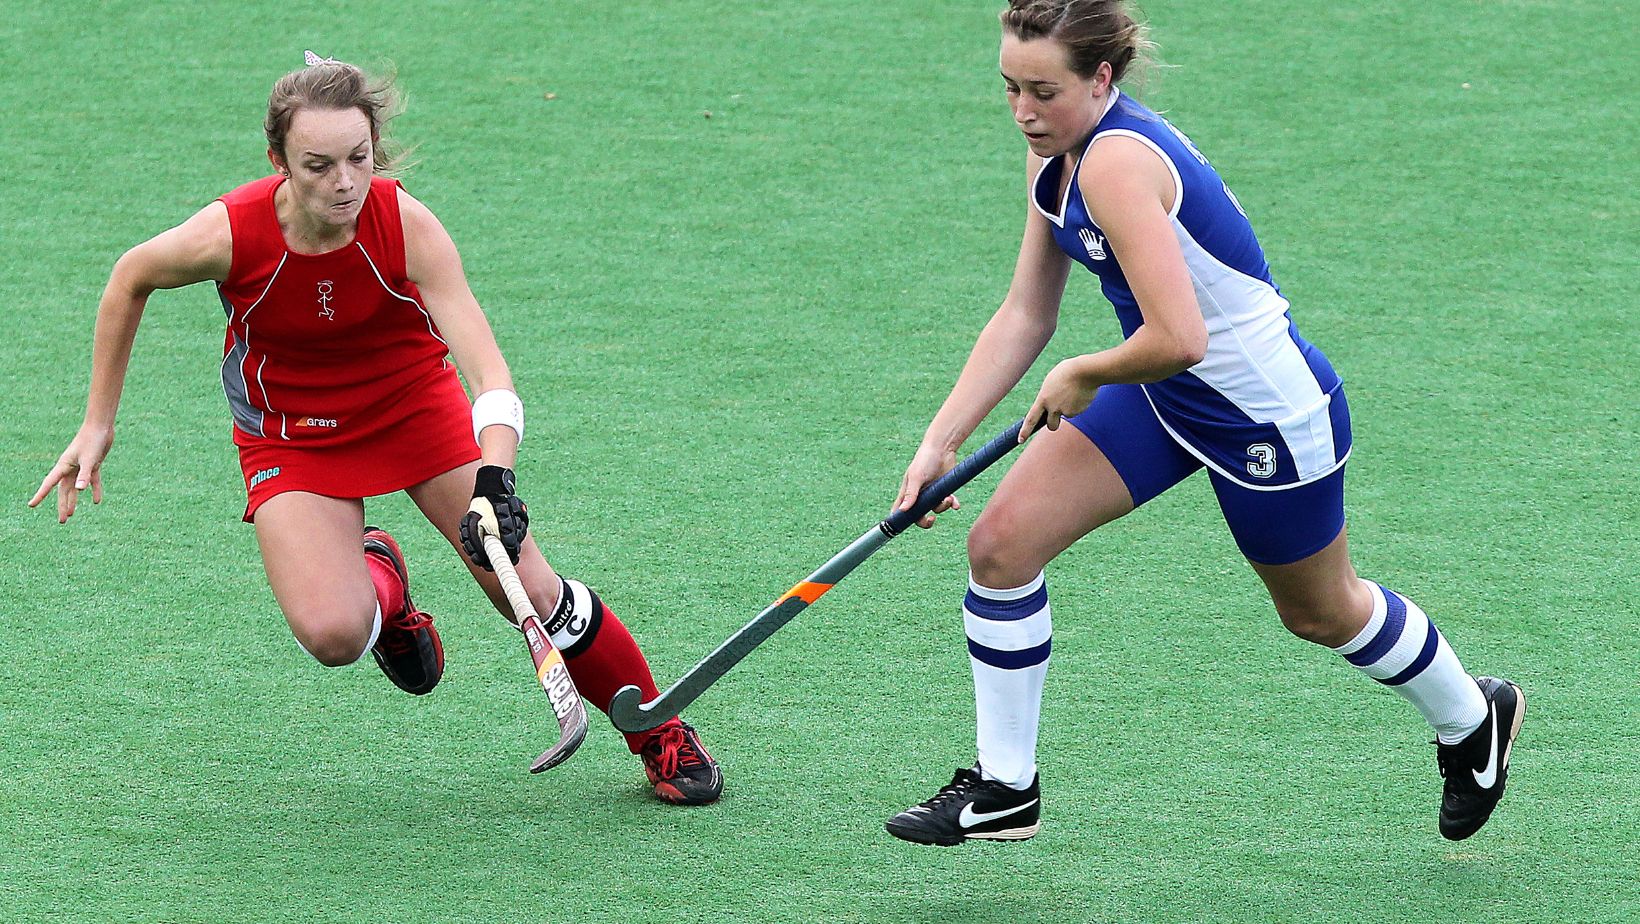 field hockey is one of the most popular female sports.